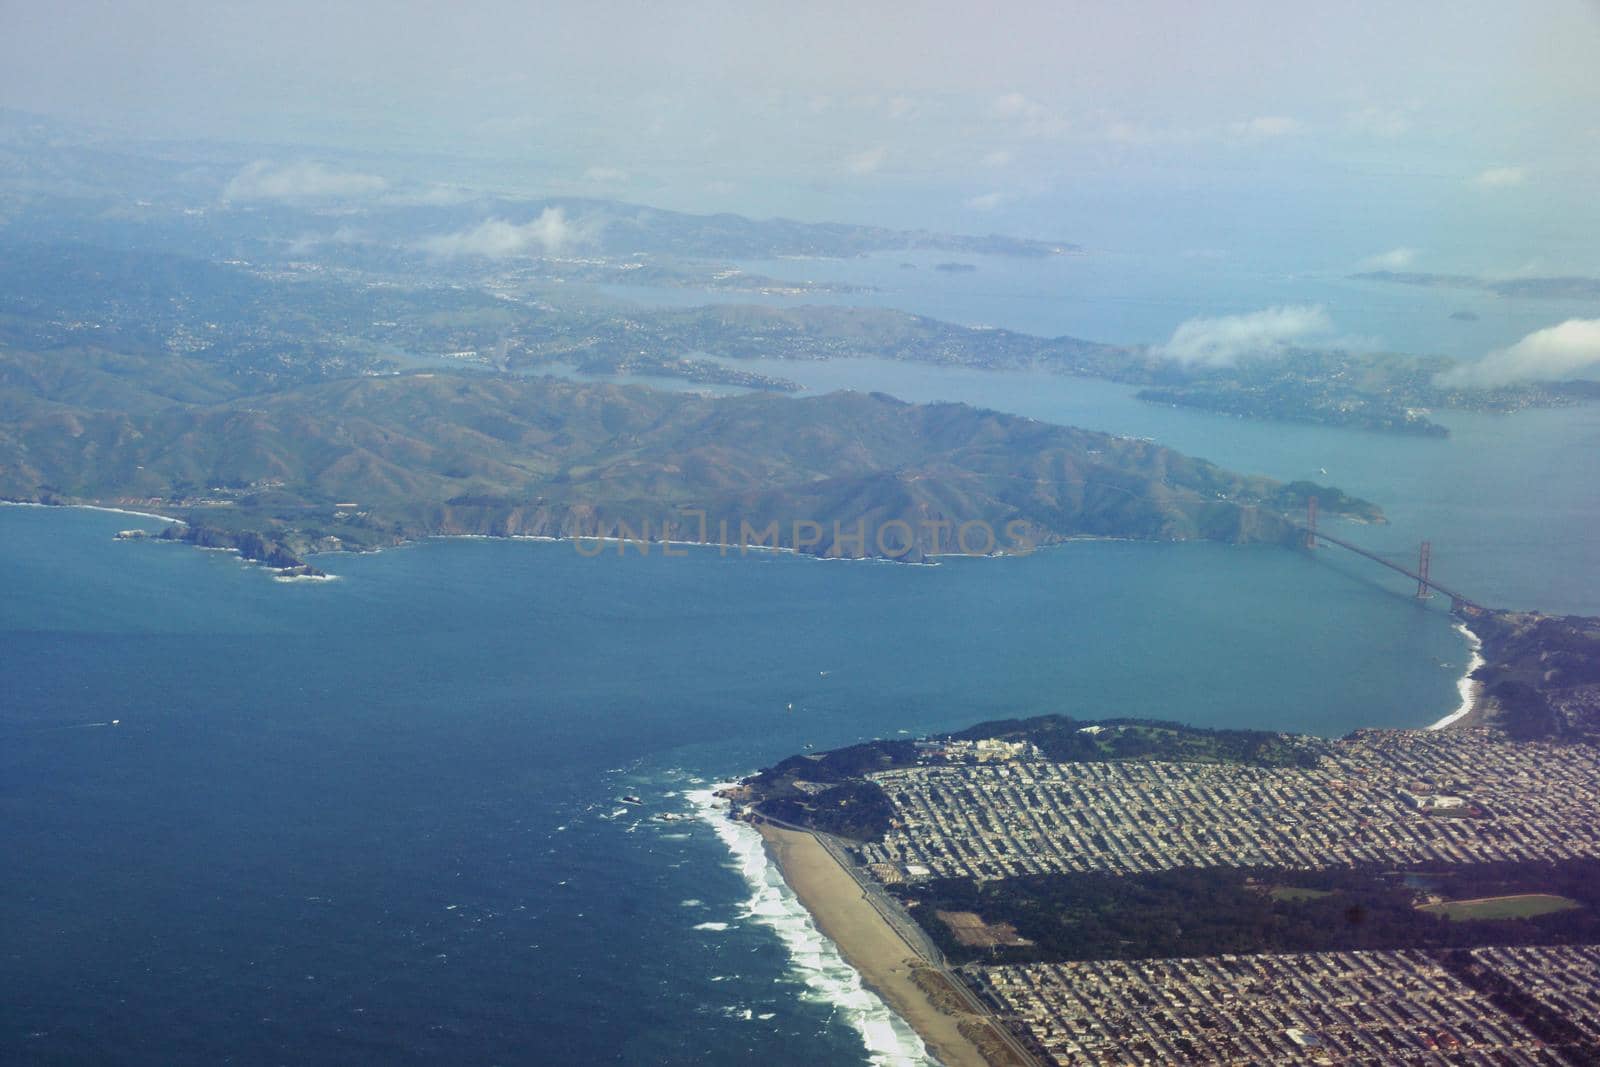 Golden Gate Bridge, Ocean Beach and the Sunset District of San Francisco and Marin County seen from the Air.